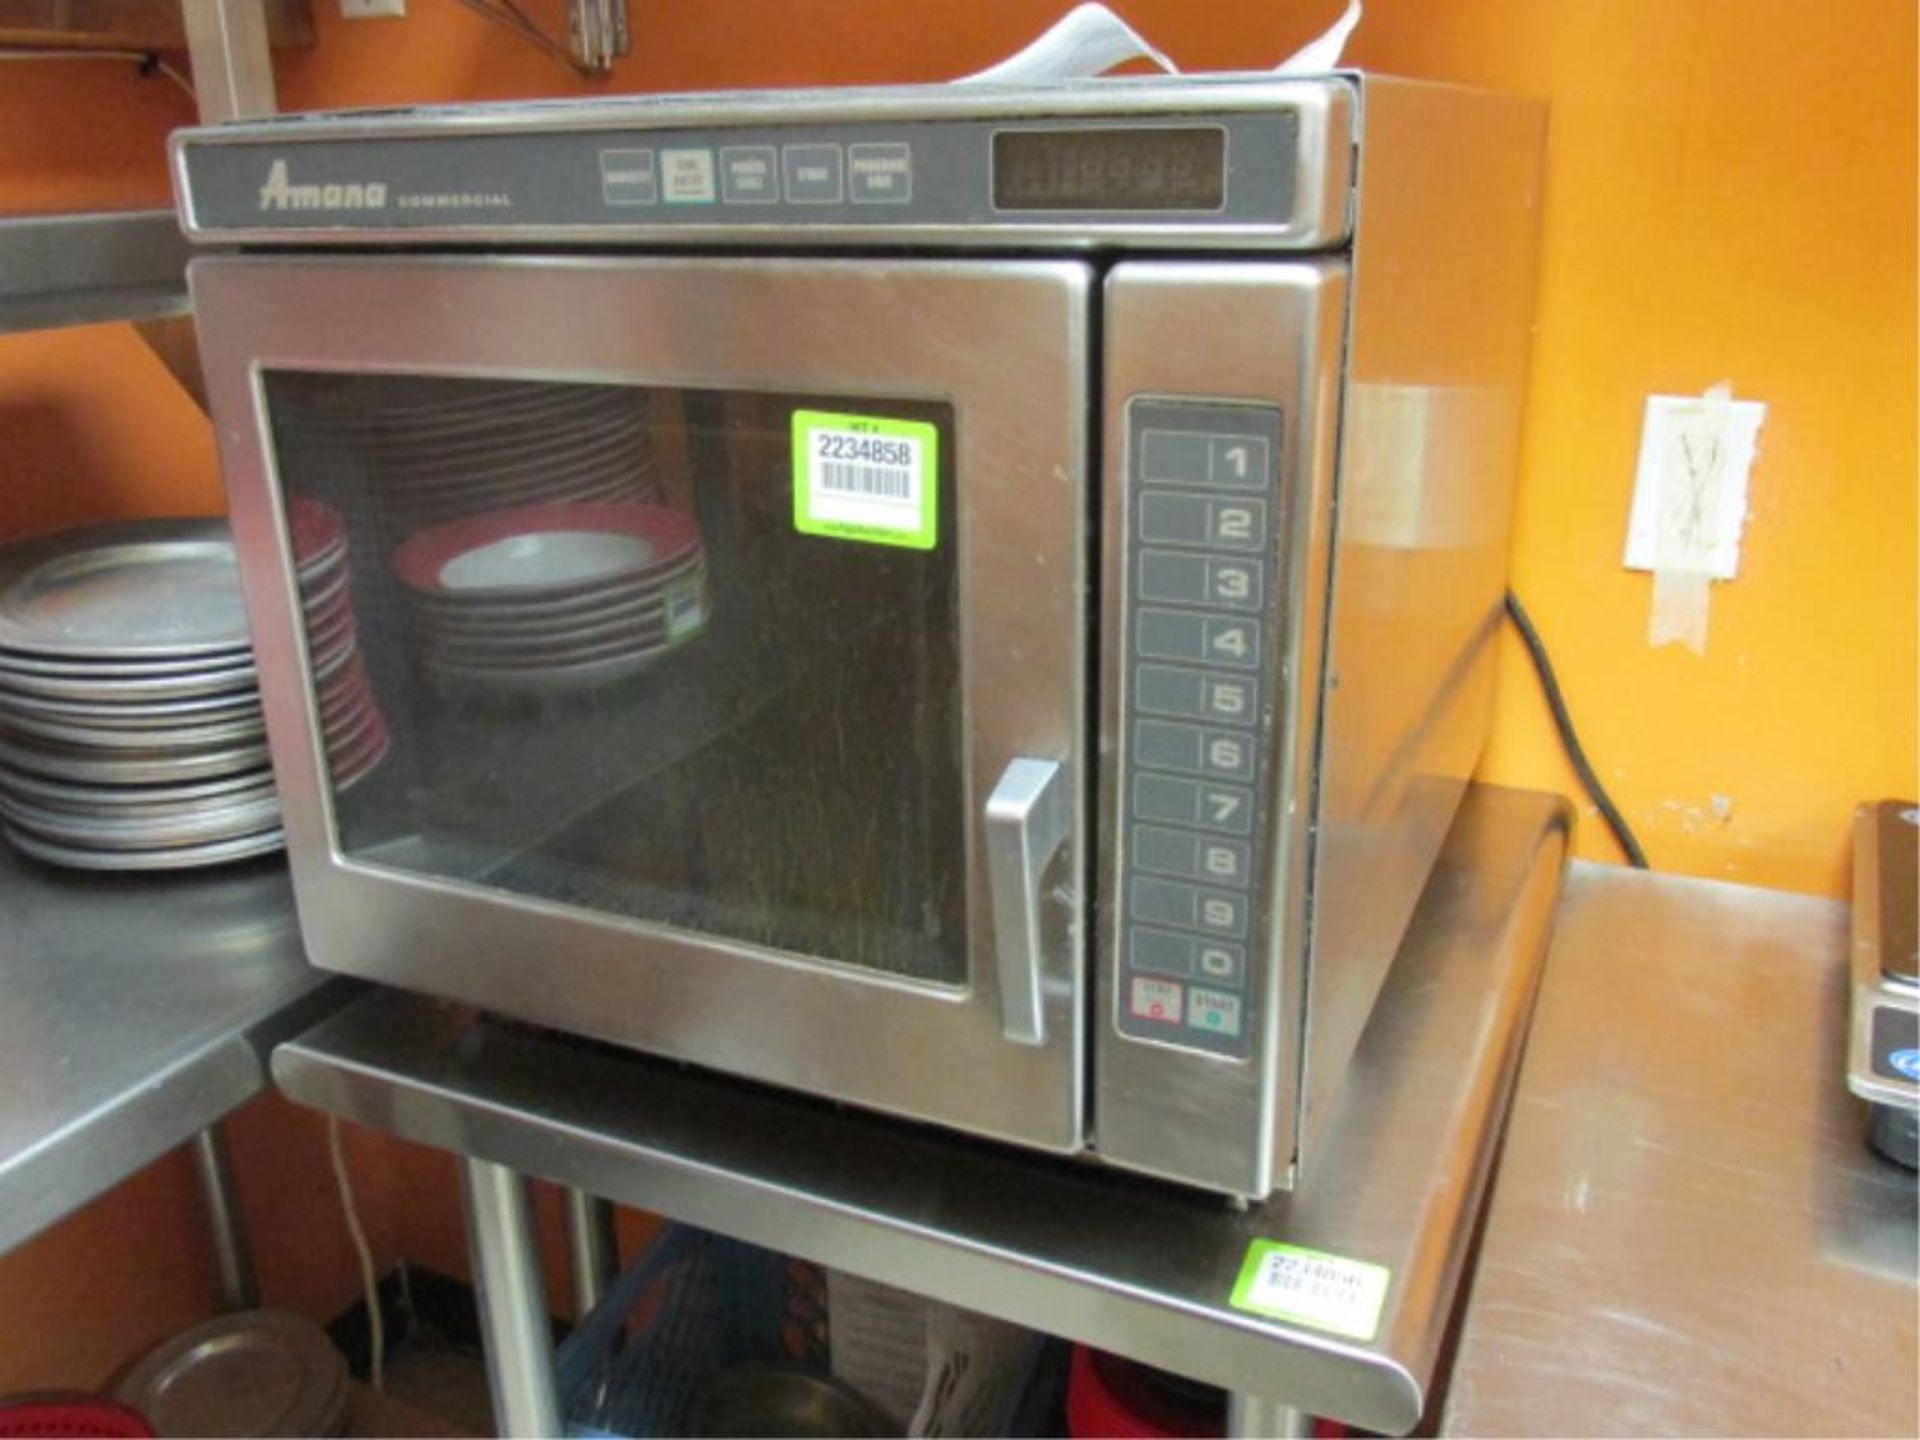 Amana Commercial Microwave. HIT# 2234858. Loc: Kitchen Asset Located at 143 Kent Street, Portland,